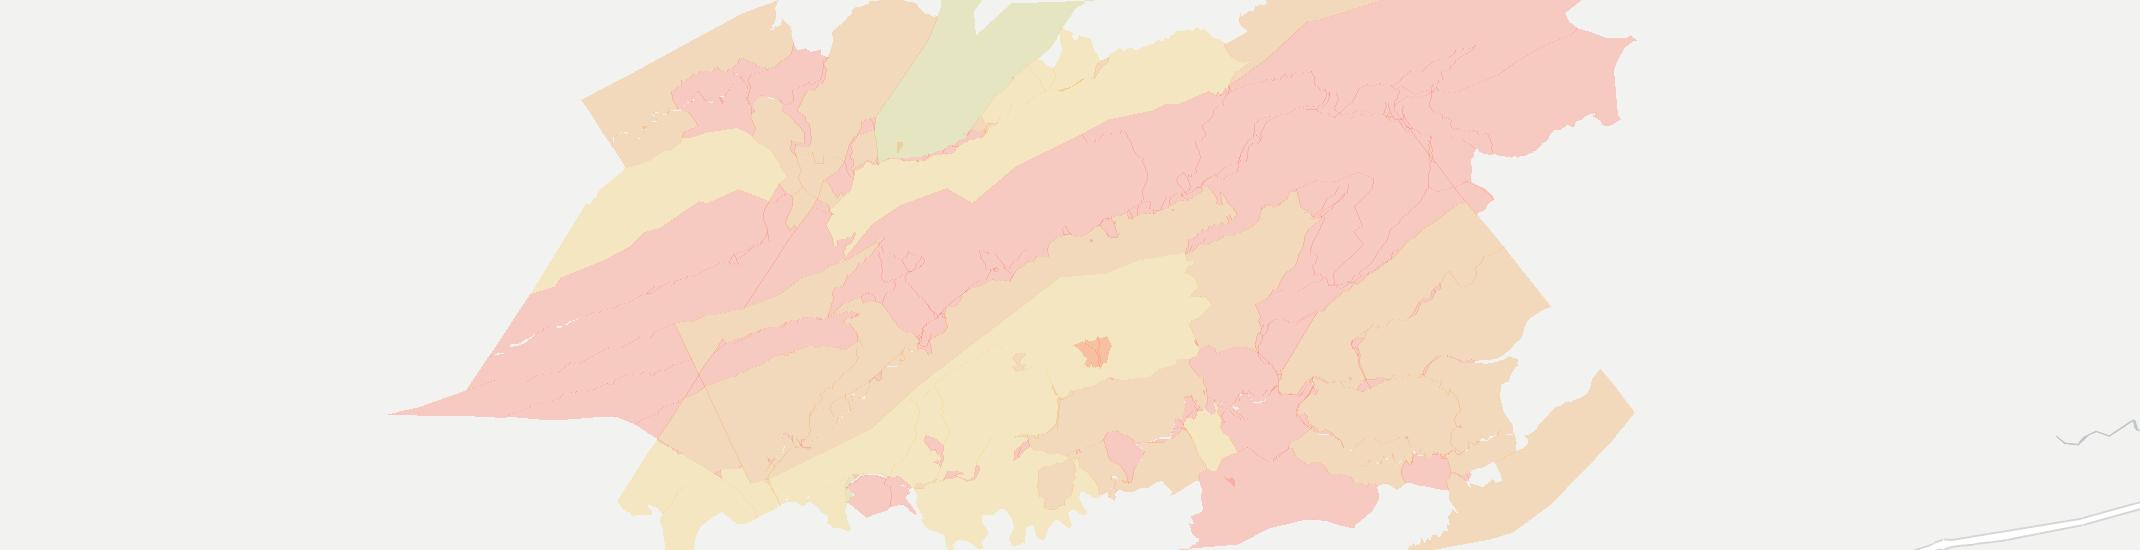 Tannersville Internet Competition Map. Click for interactive map